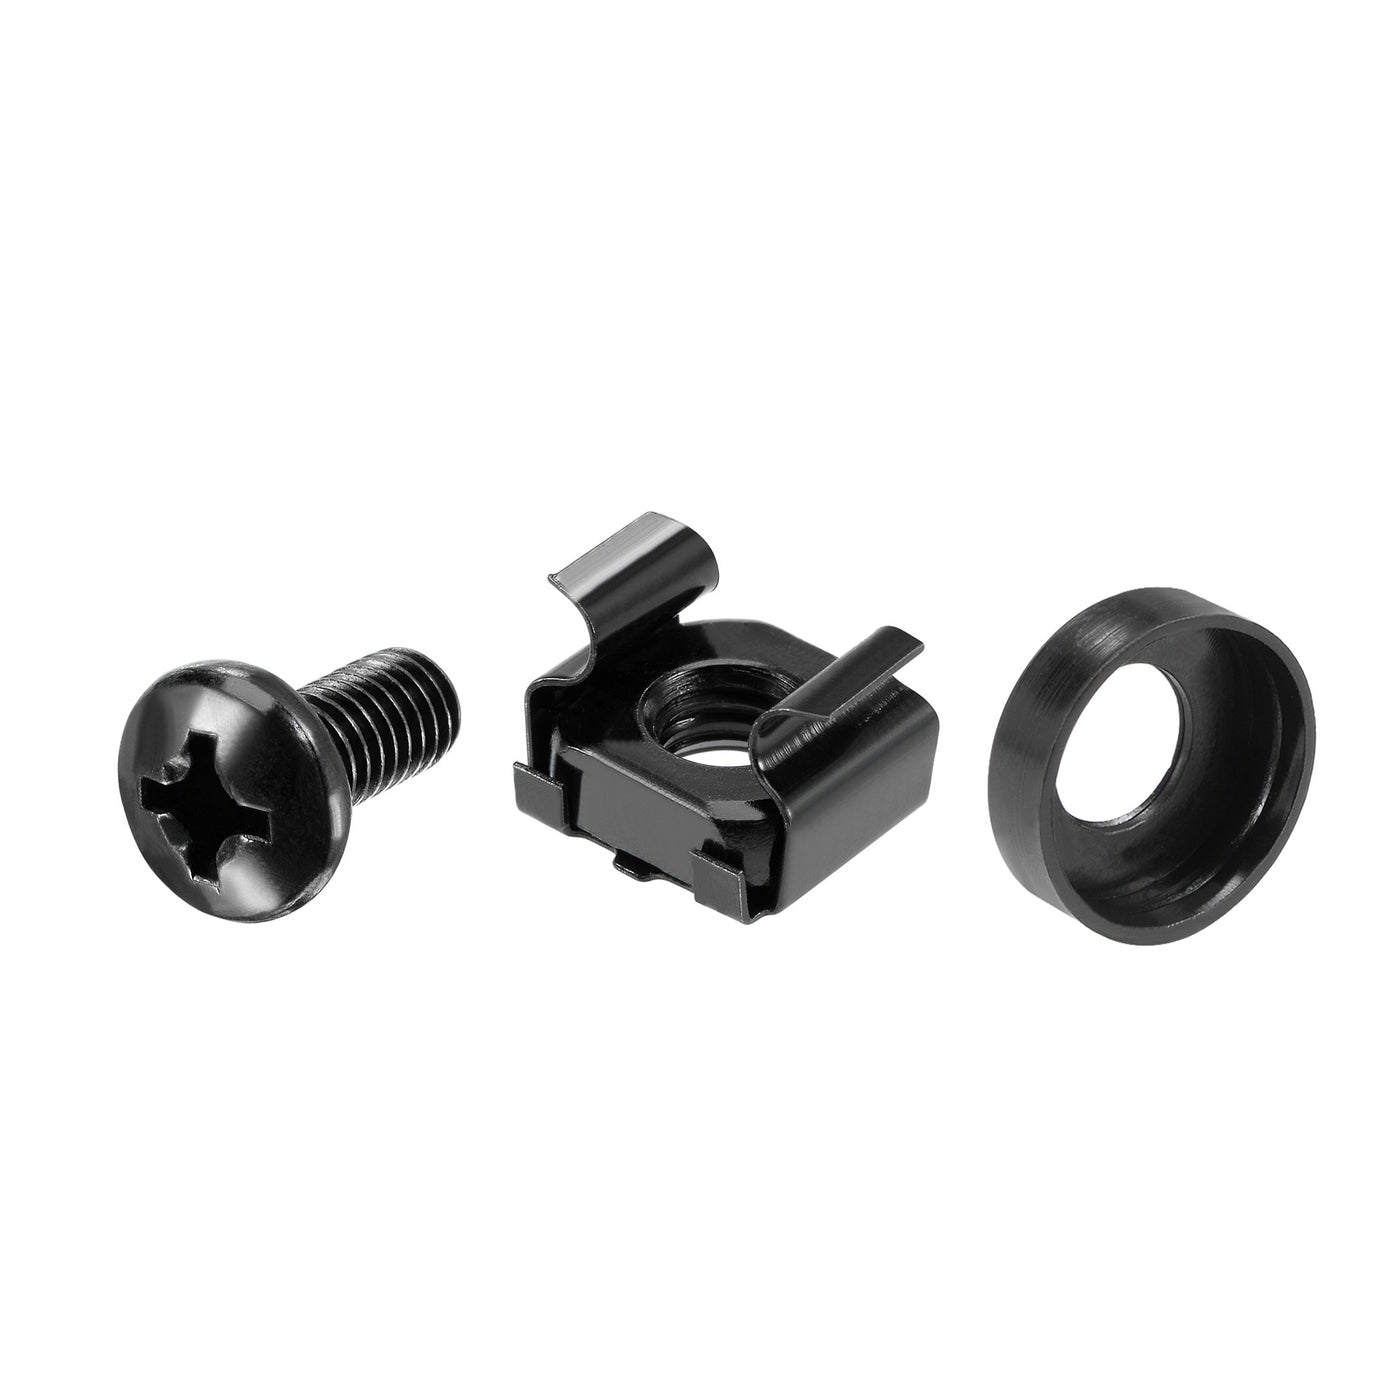 uxcell Uxcell M6x12mm Server Rack Cage Nuts Black 10Set, Mounting Screws for Server Shelves